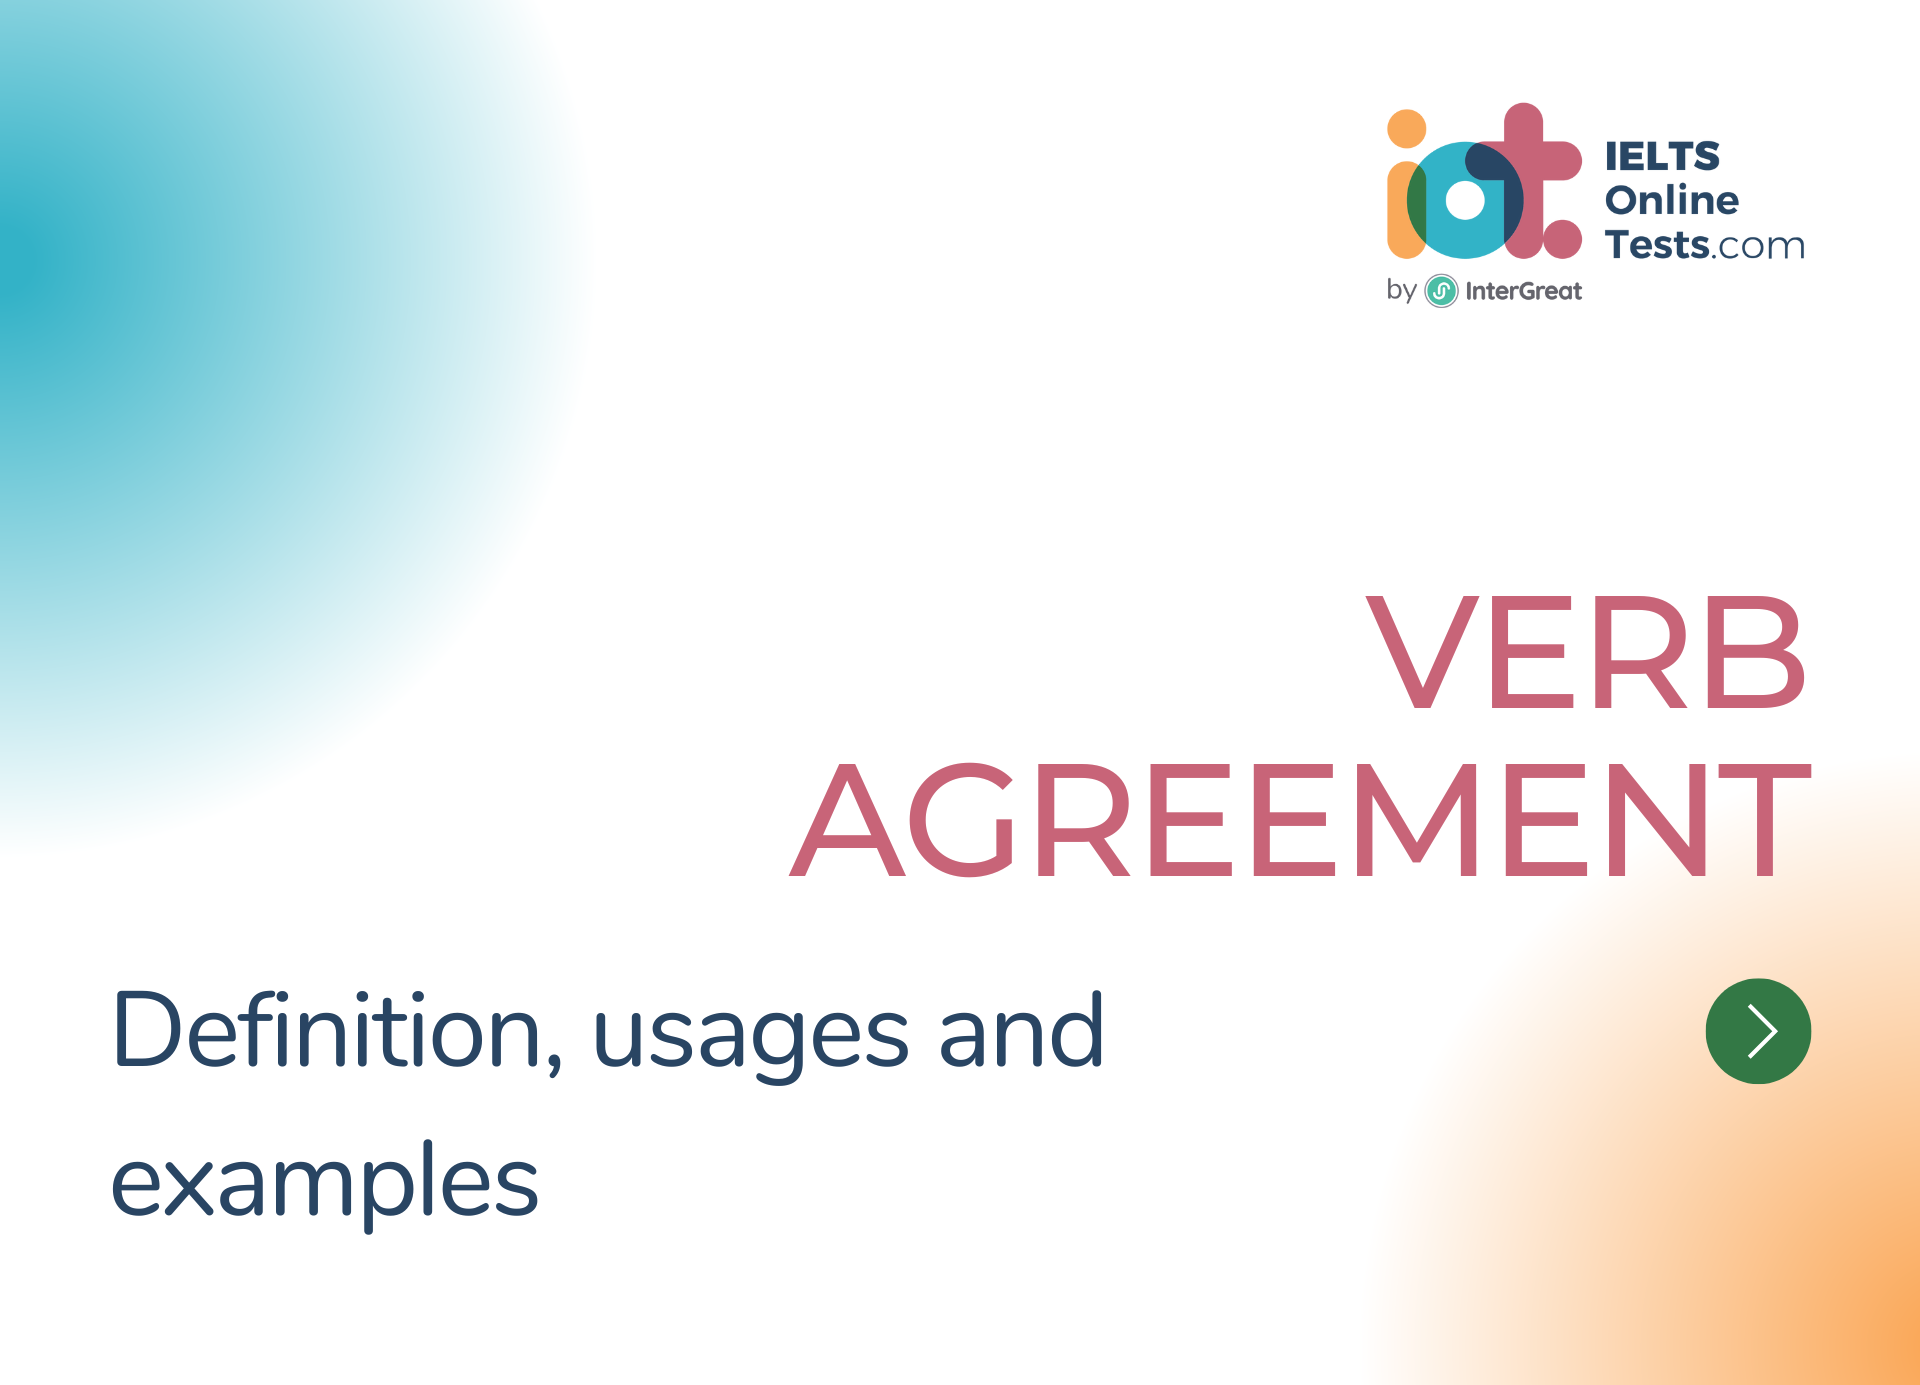 Verb Agreement Definition And Examples Ielts Online Tests 0141